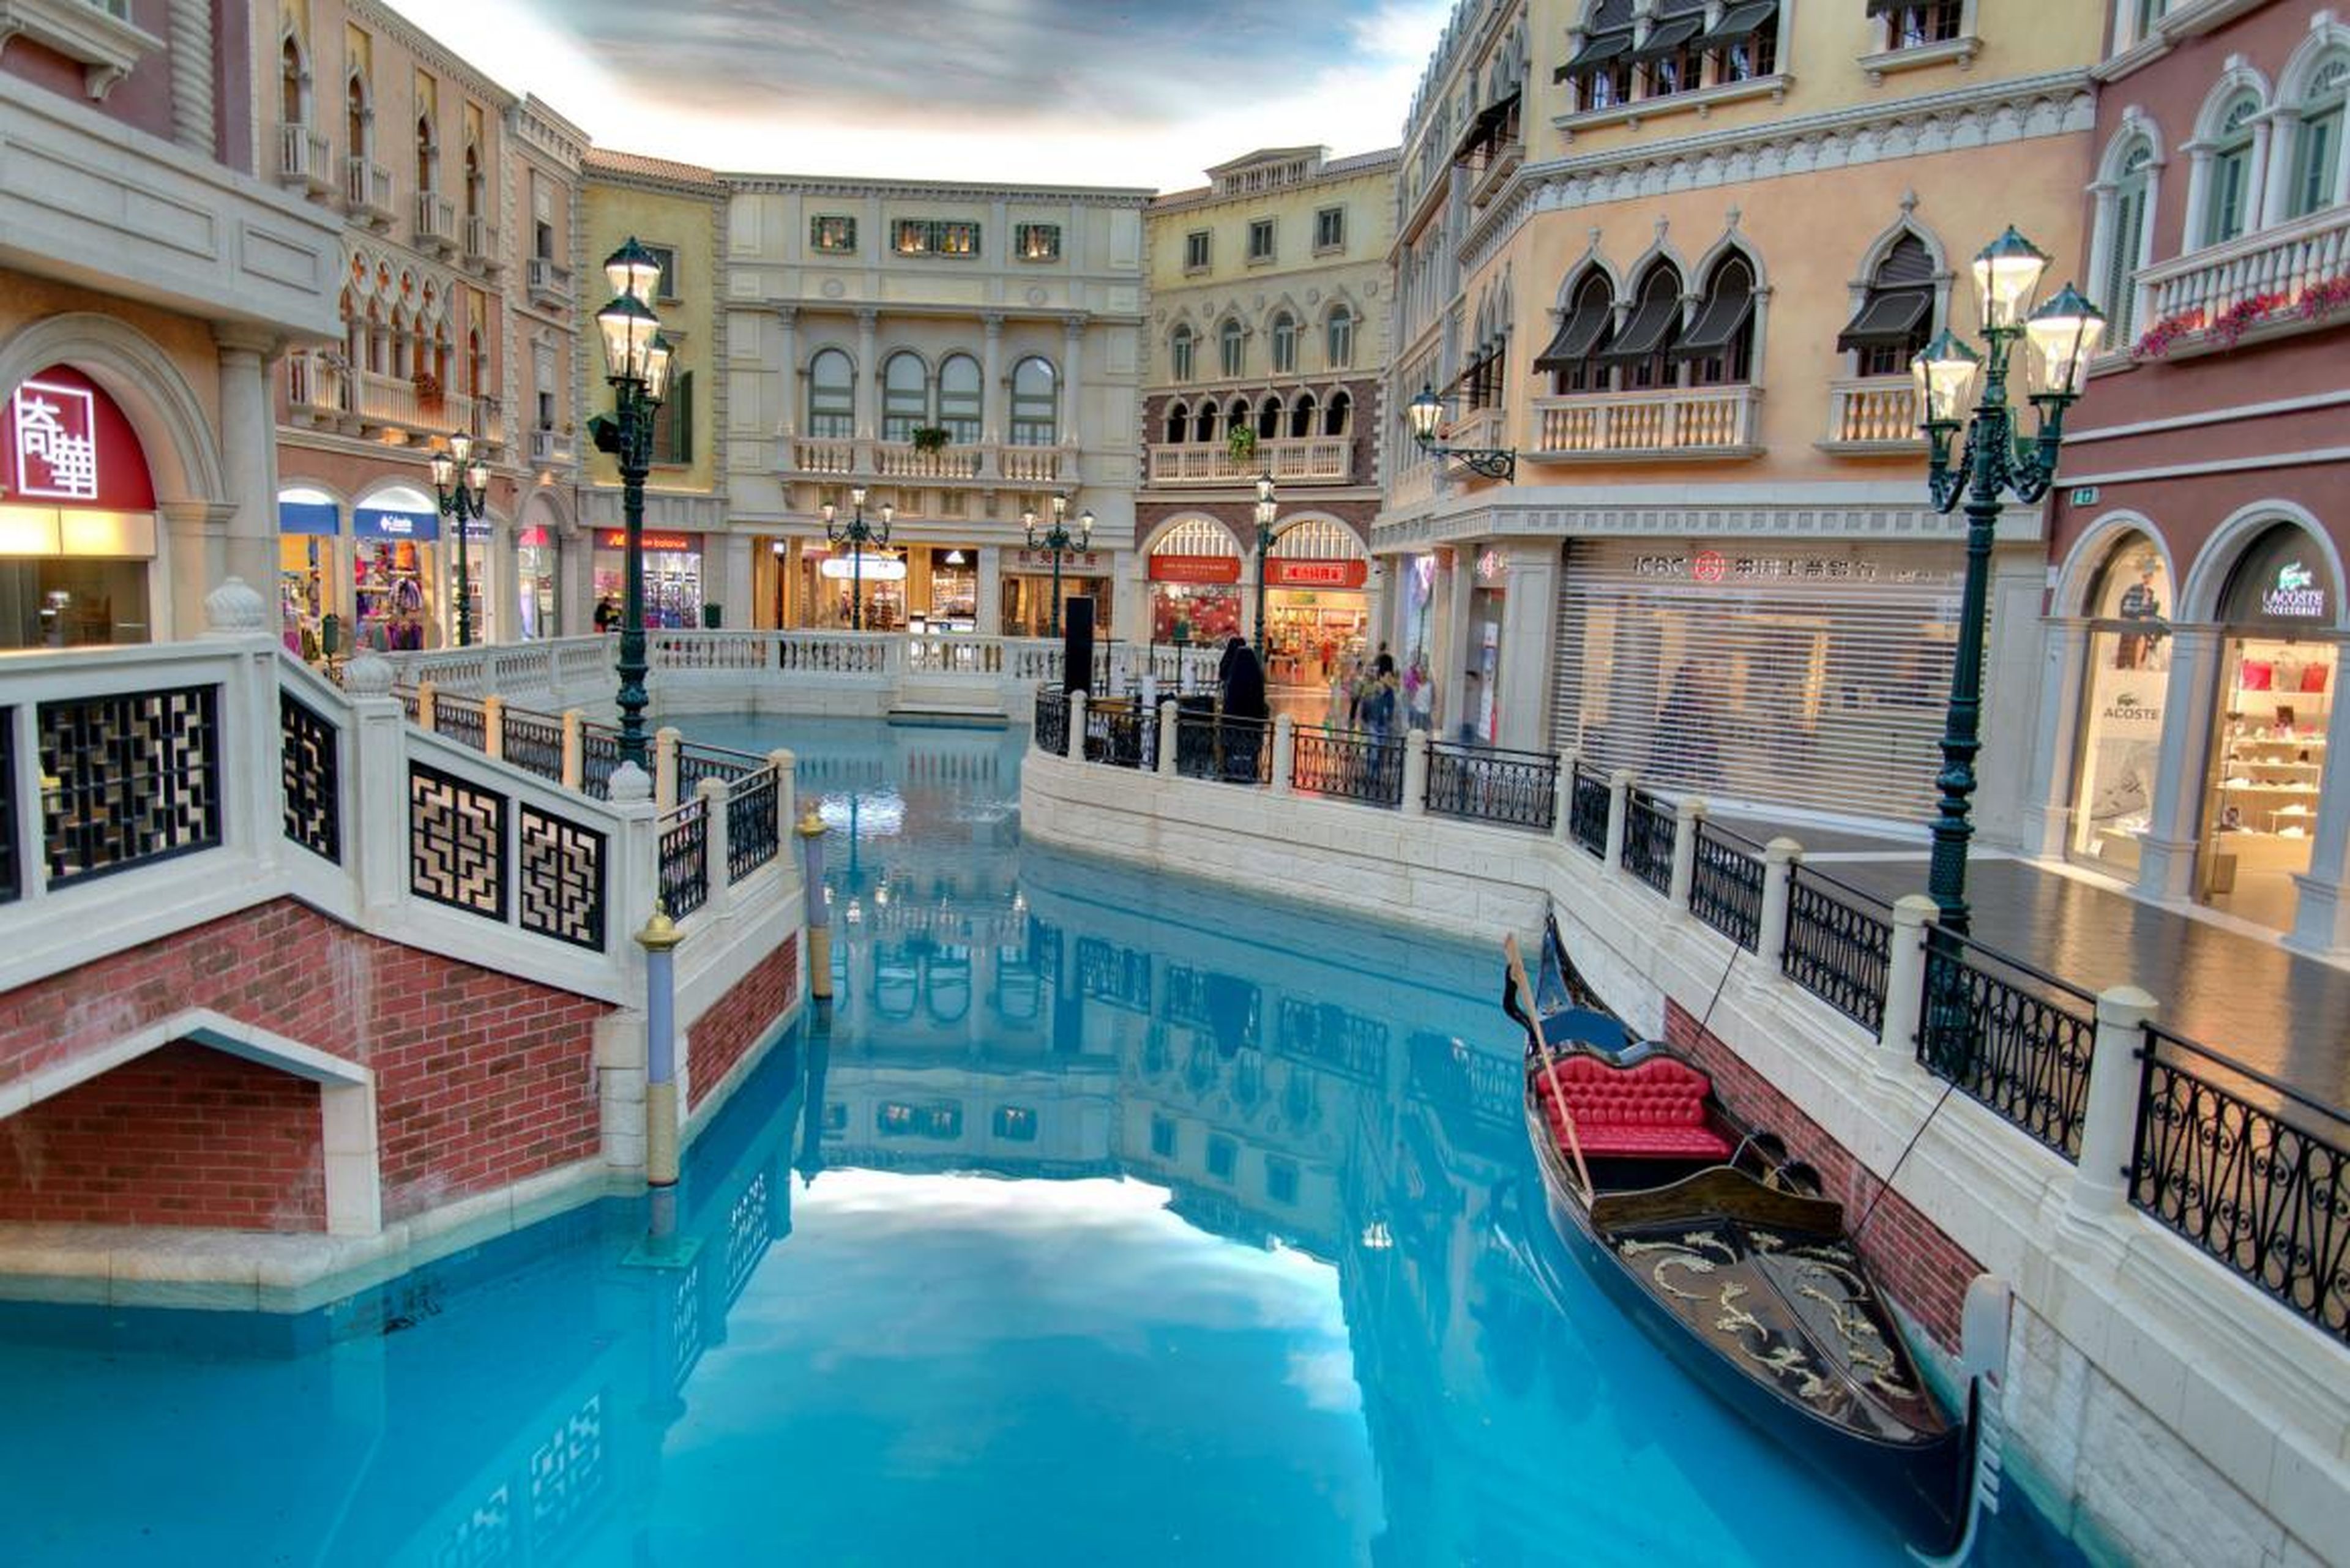 In the center of the mall, there's a manmade "river" (modeled after the famous one in Venice), where shoppers can take gondola rides.